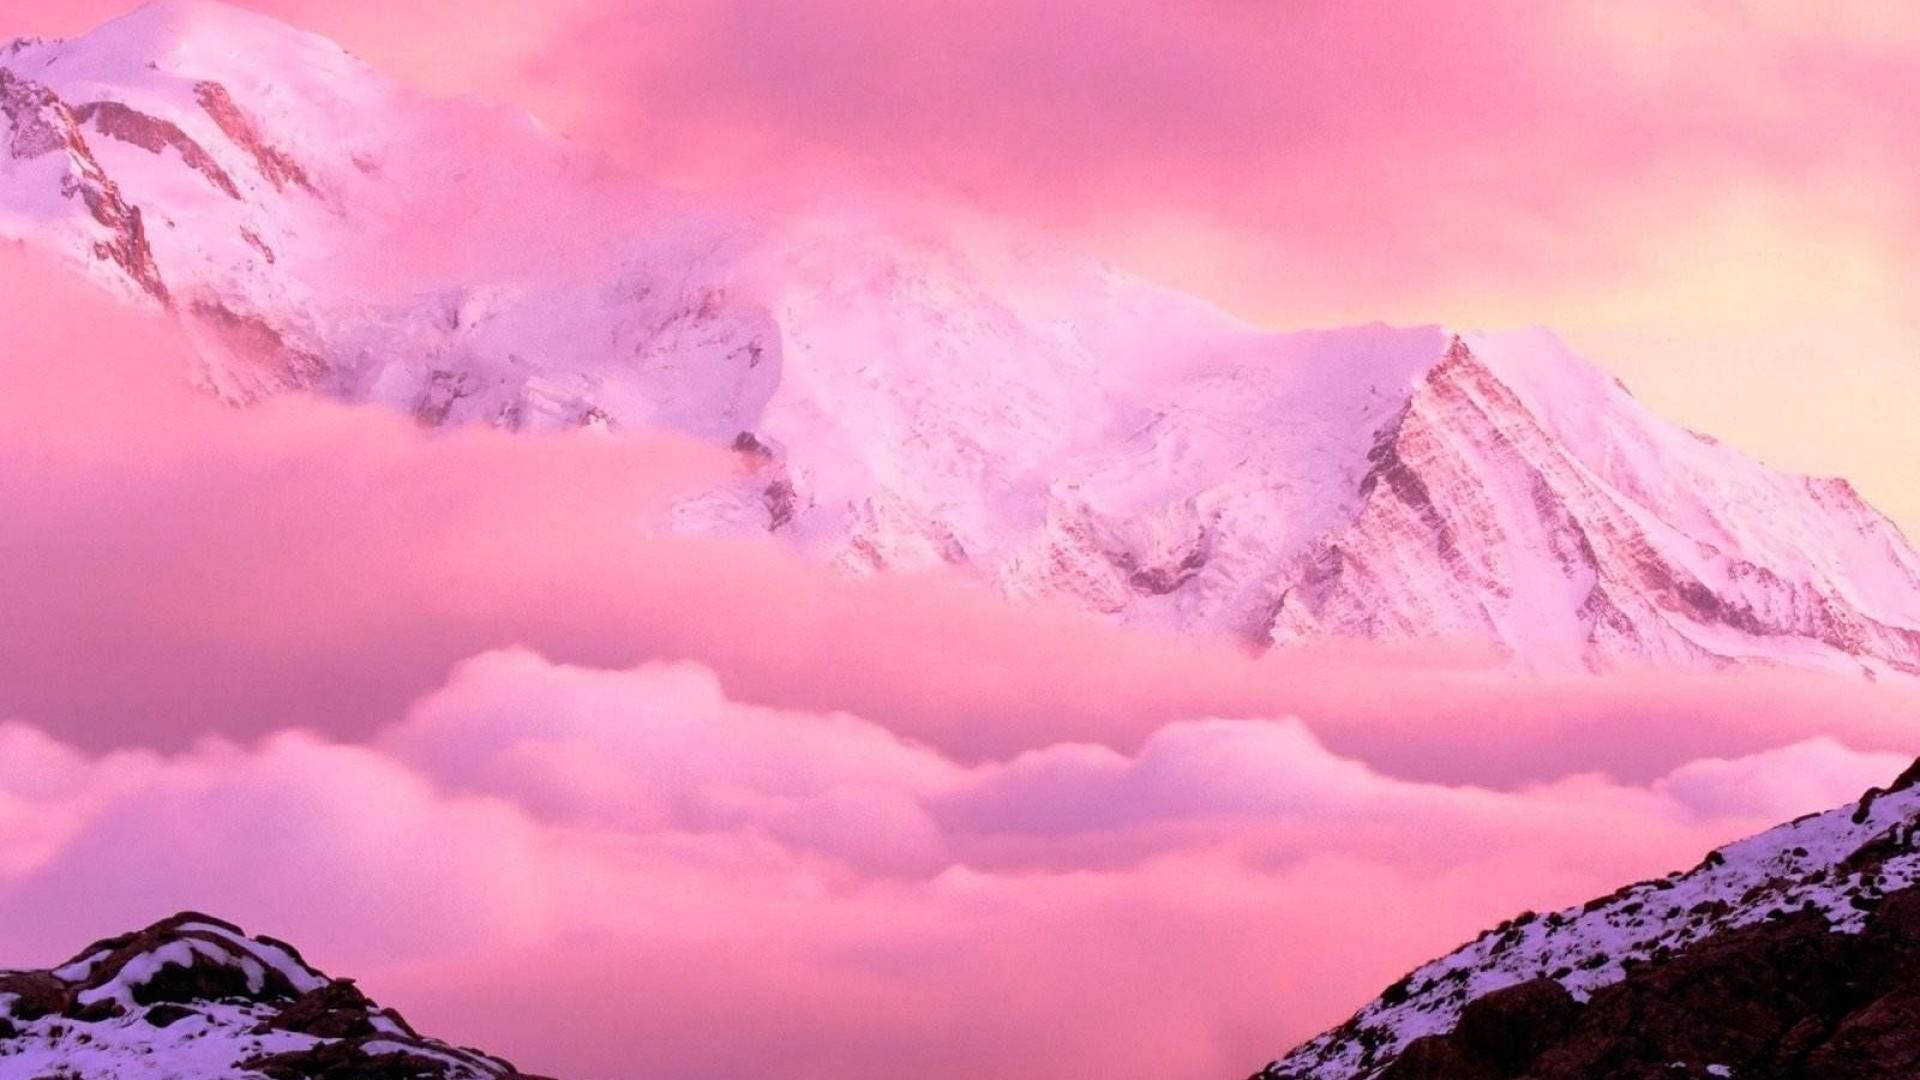 Aesthetic Pink Mountain Picture